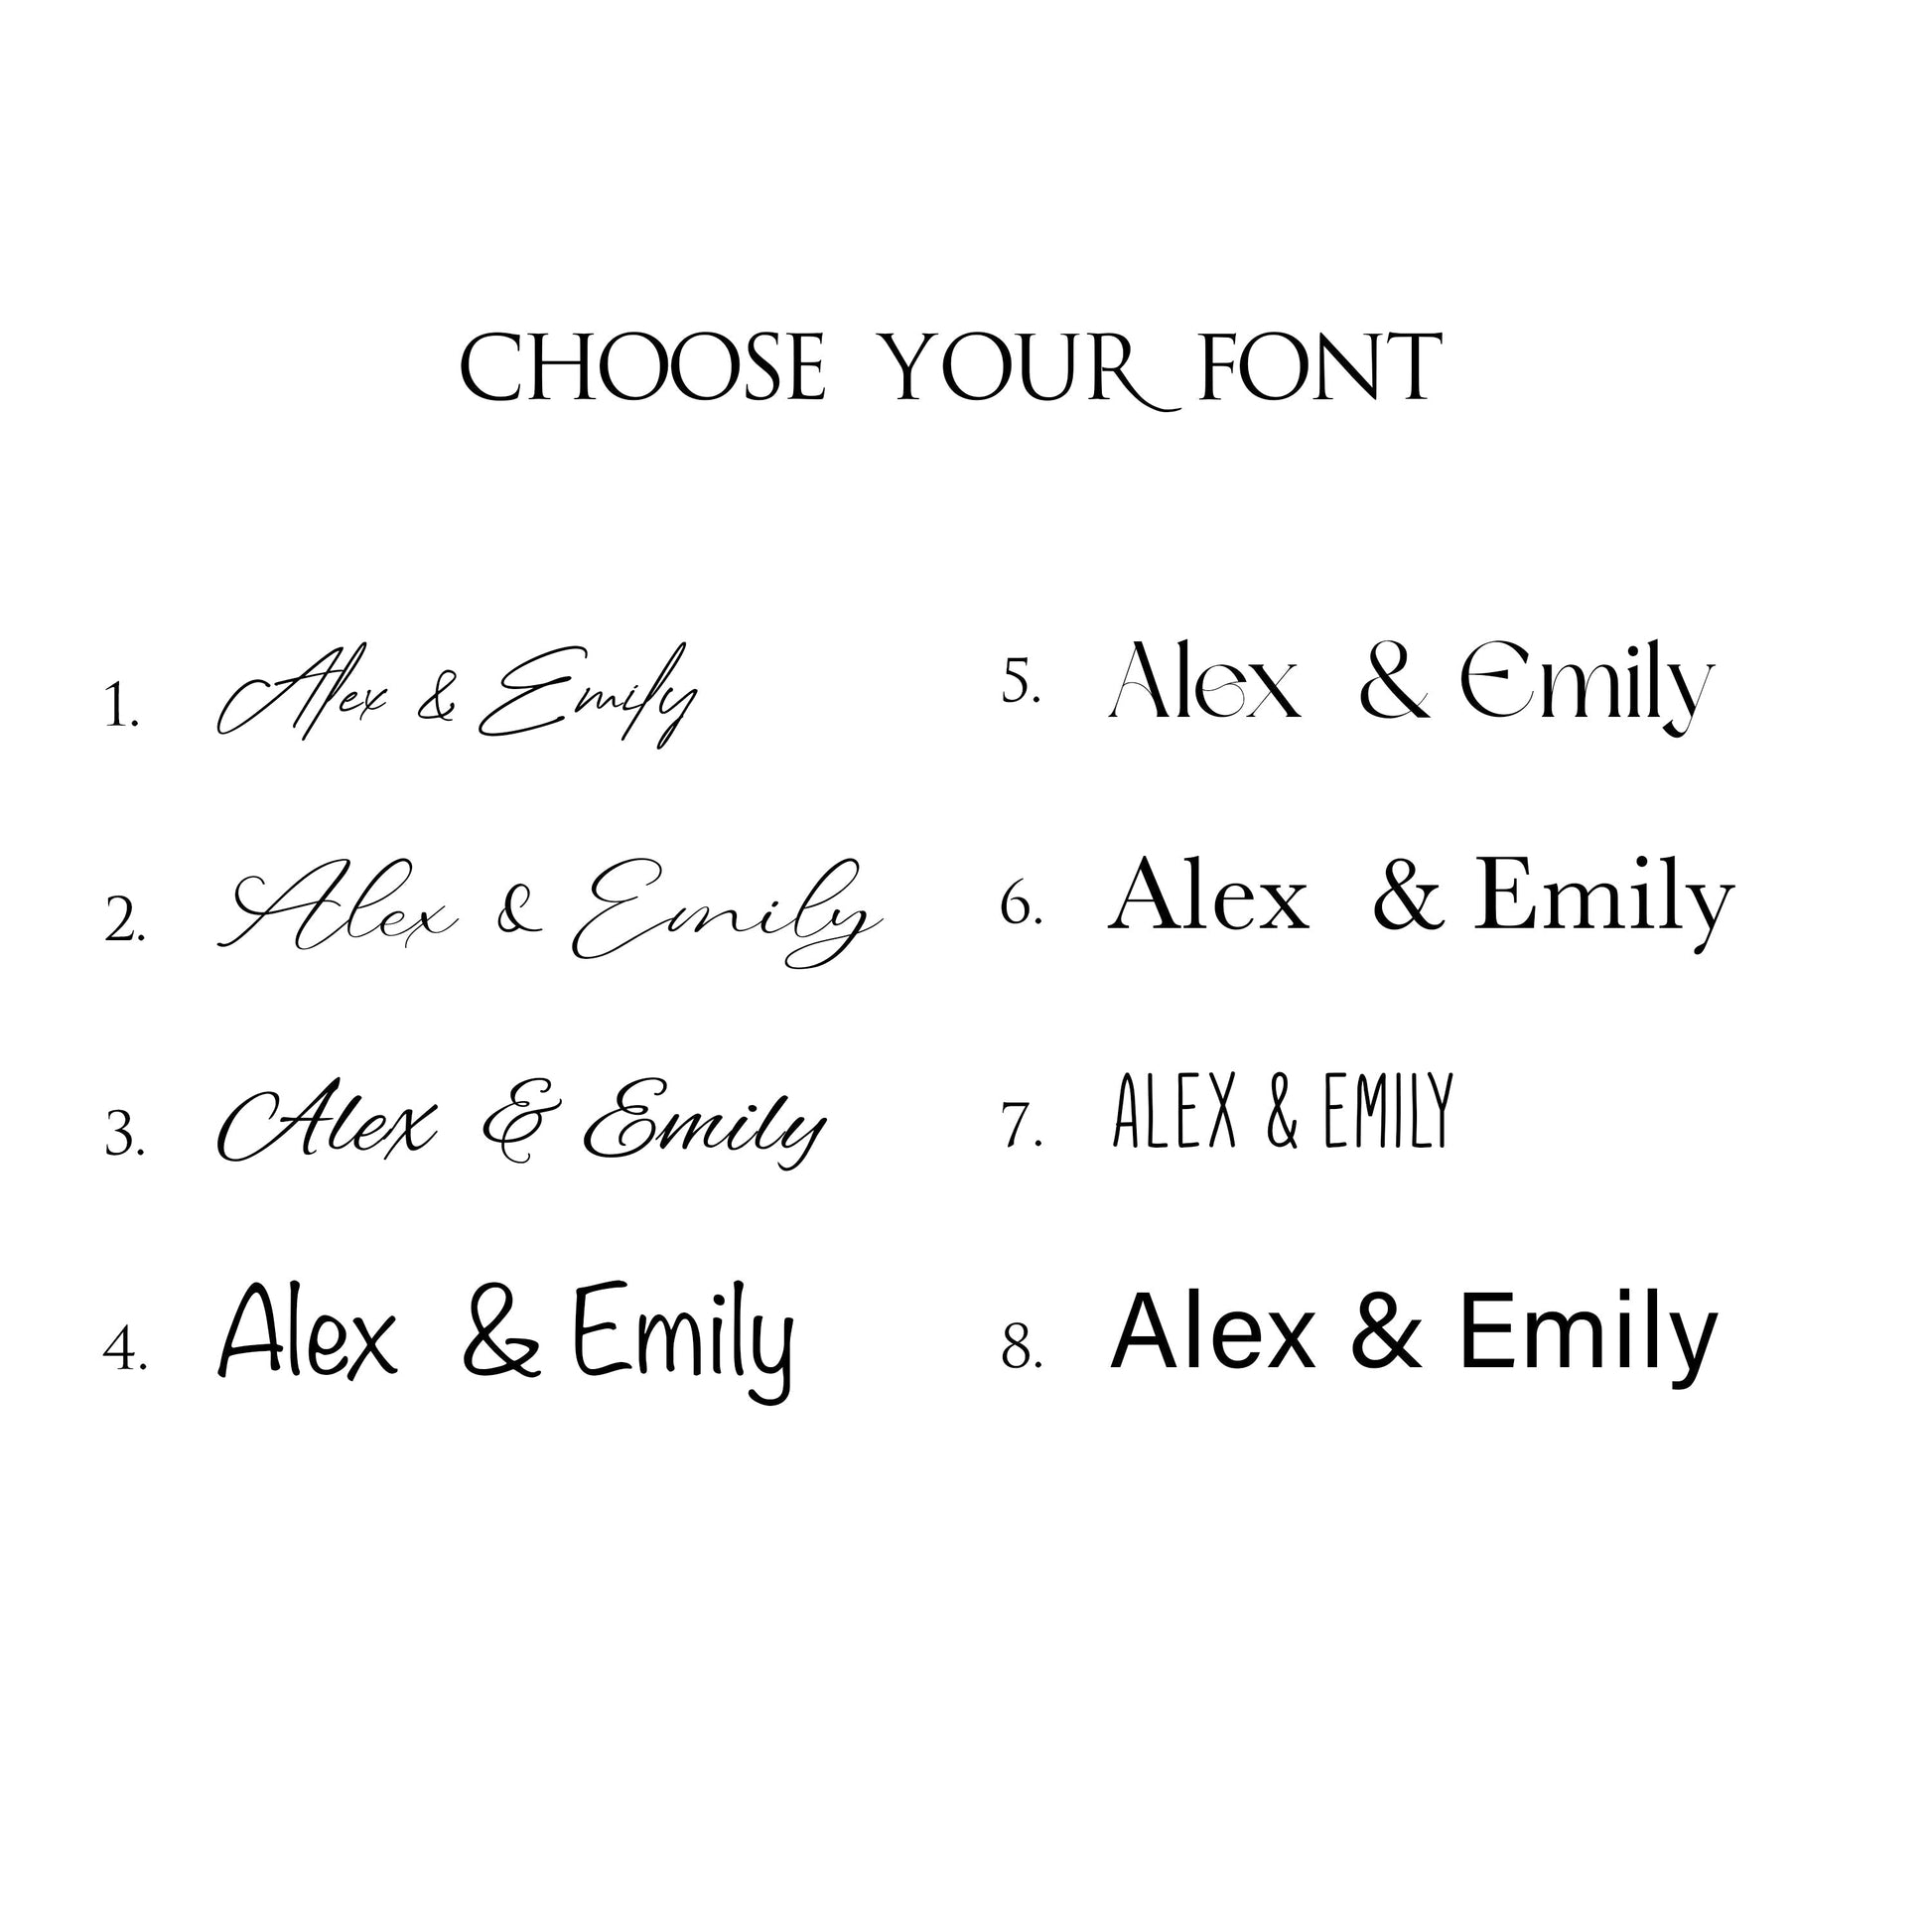 Select your preferred font style from the options.